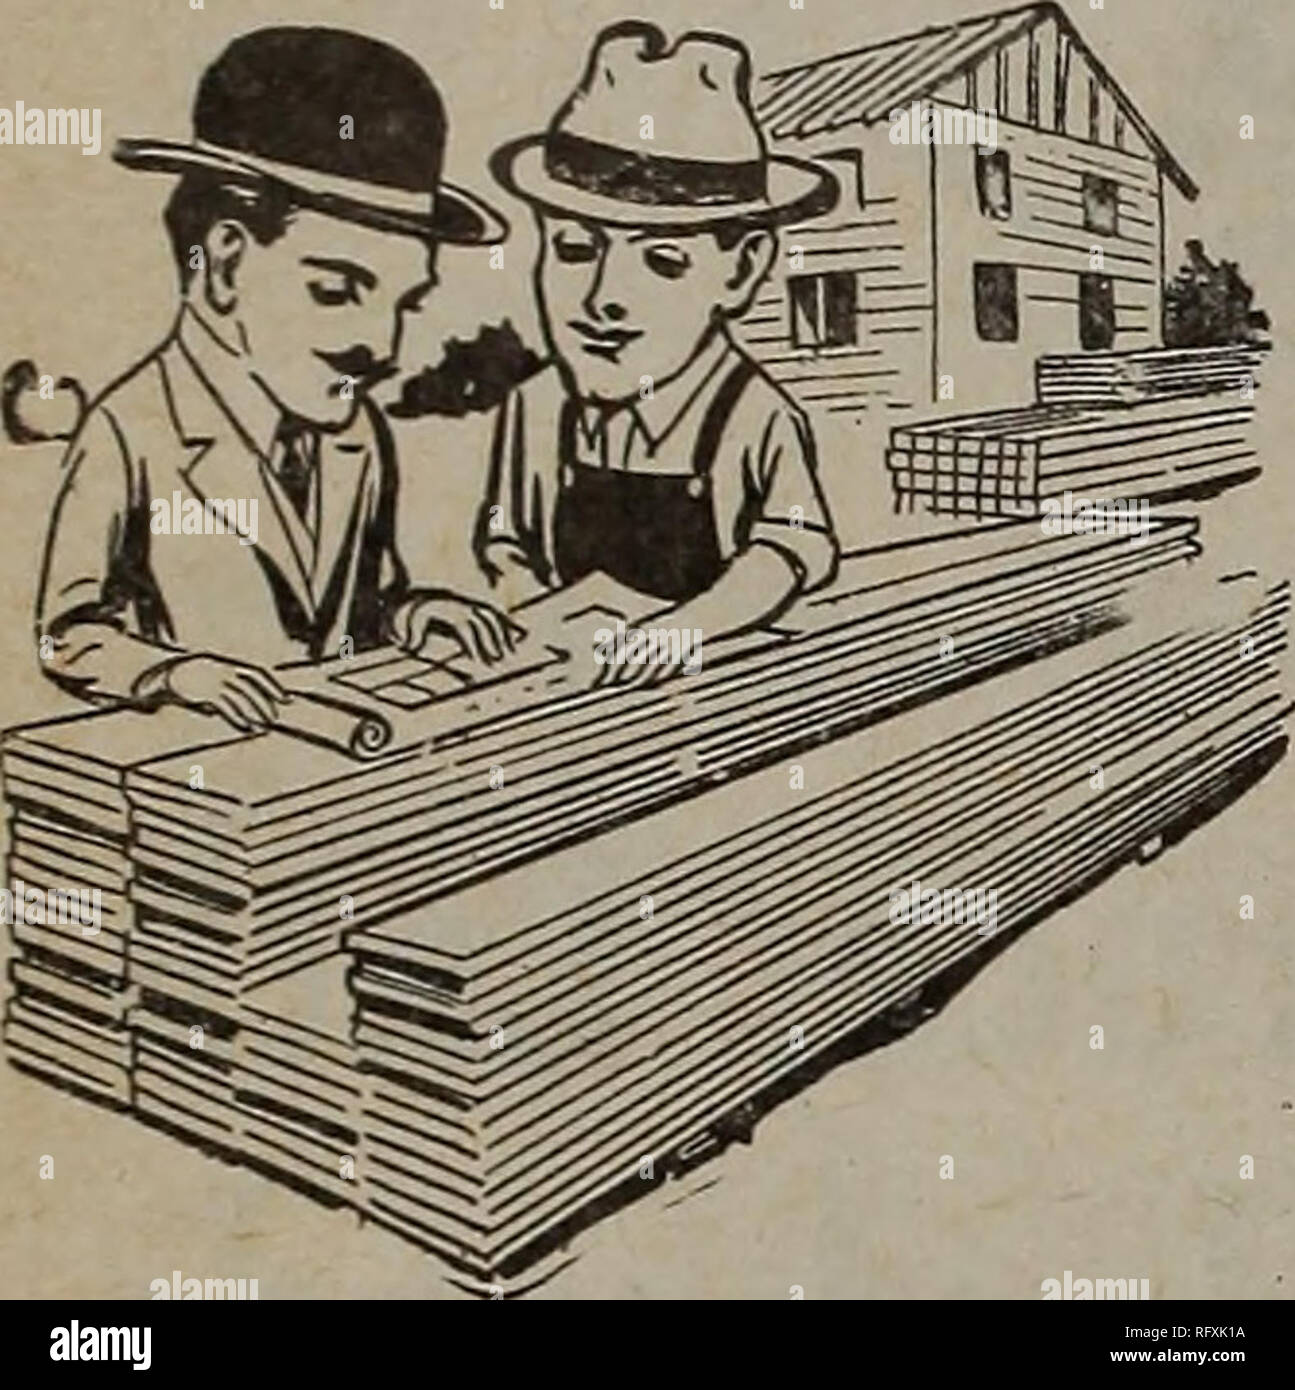 . Canadian forest industries January-June 1923. Lumbering; Forests and forestry; Forest products; Wood-pulp industry; Wood-using industries. 12 CANADA LUMBERMAN THE MontrealLumberCo. Limited WHOLESALE LUMBER 759Notre Dame St. W.,Montr ea) W. K. GRAFFTEY, President and Managing Director. DR. BELL'S Veterinary Wonder Remedies 60,000 one dollar ($1.00) bottles Free to horsemen who give the Wonder a fair trial. Guaranteed for Colic, Inflamma- tion of the Lungs, Bowels, Kidneys, Fevers, Distemper, etc. Send 25c for Mailing Package, etc. Agents wanted. Write your address plainly. DR. BELL. V S Kines Stock Photo